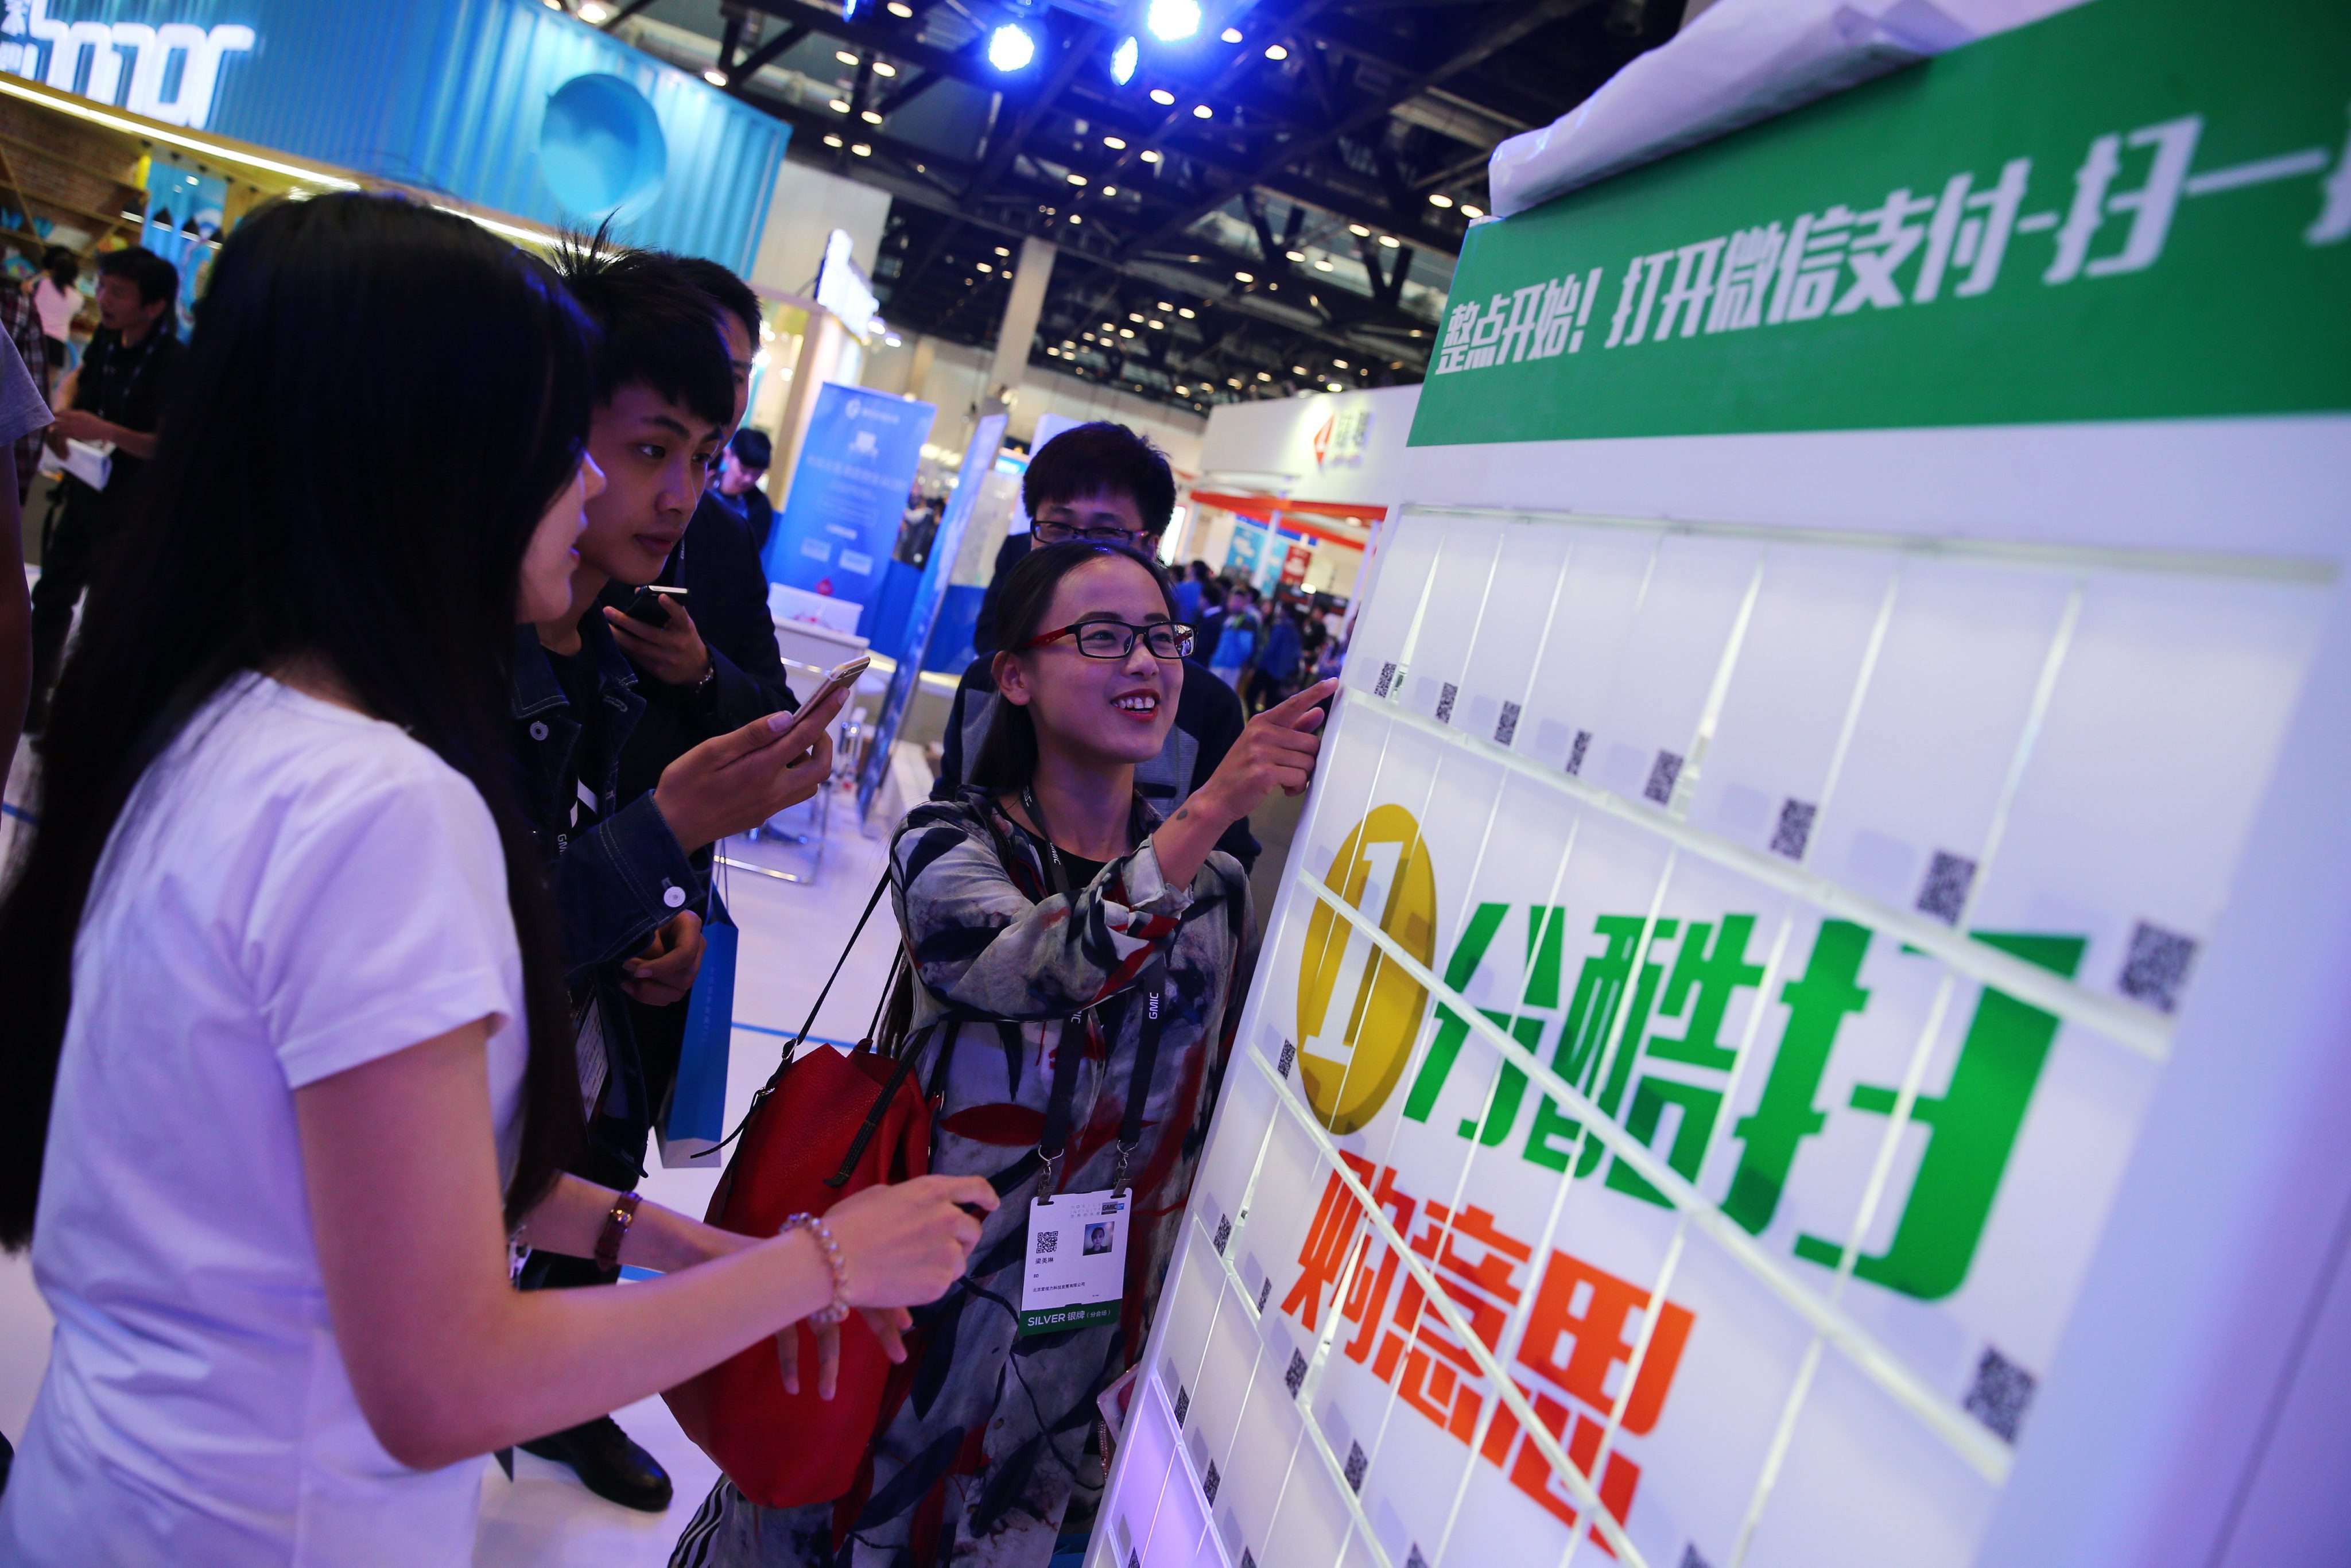 Visitors use the WeChat payment system for gifts at the 2016 Global Mobile Internet Conference in Beijing. Photo: EPA